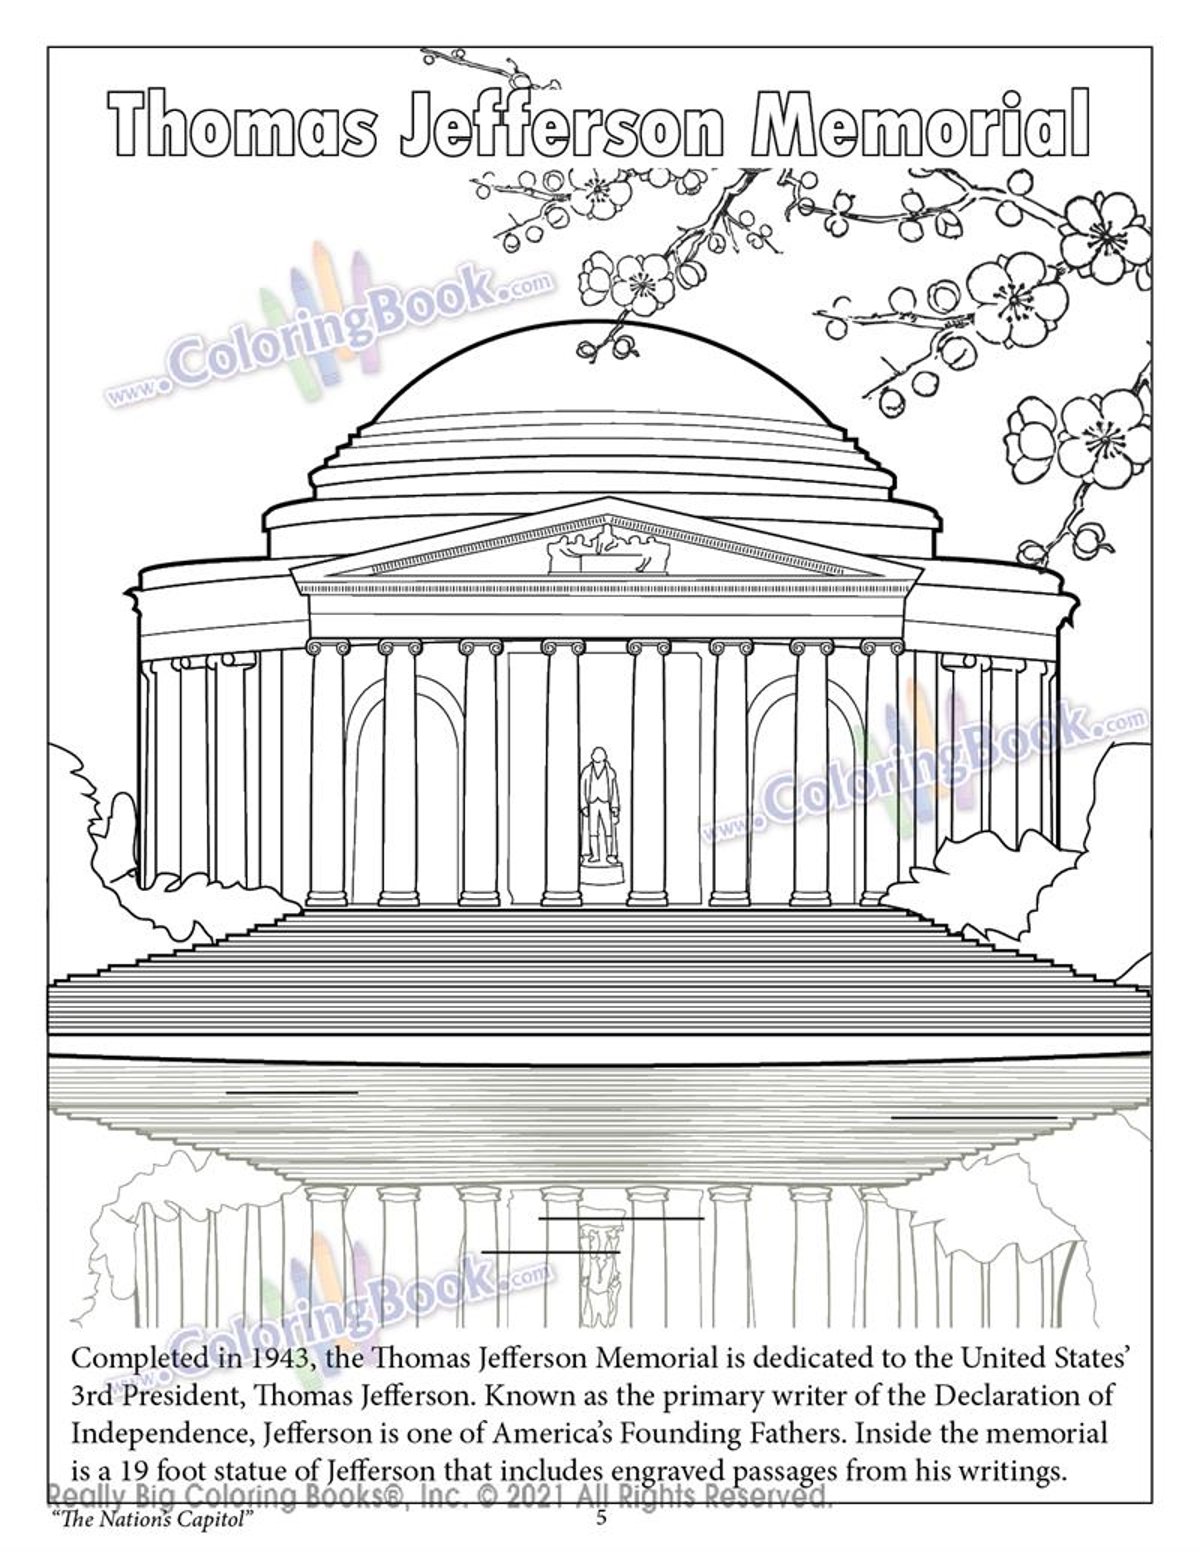 Really big coloring books coloring in washington dc coloring and activity book